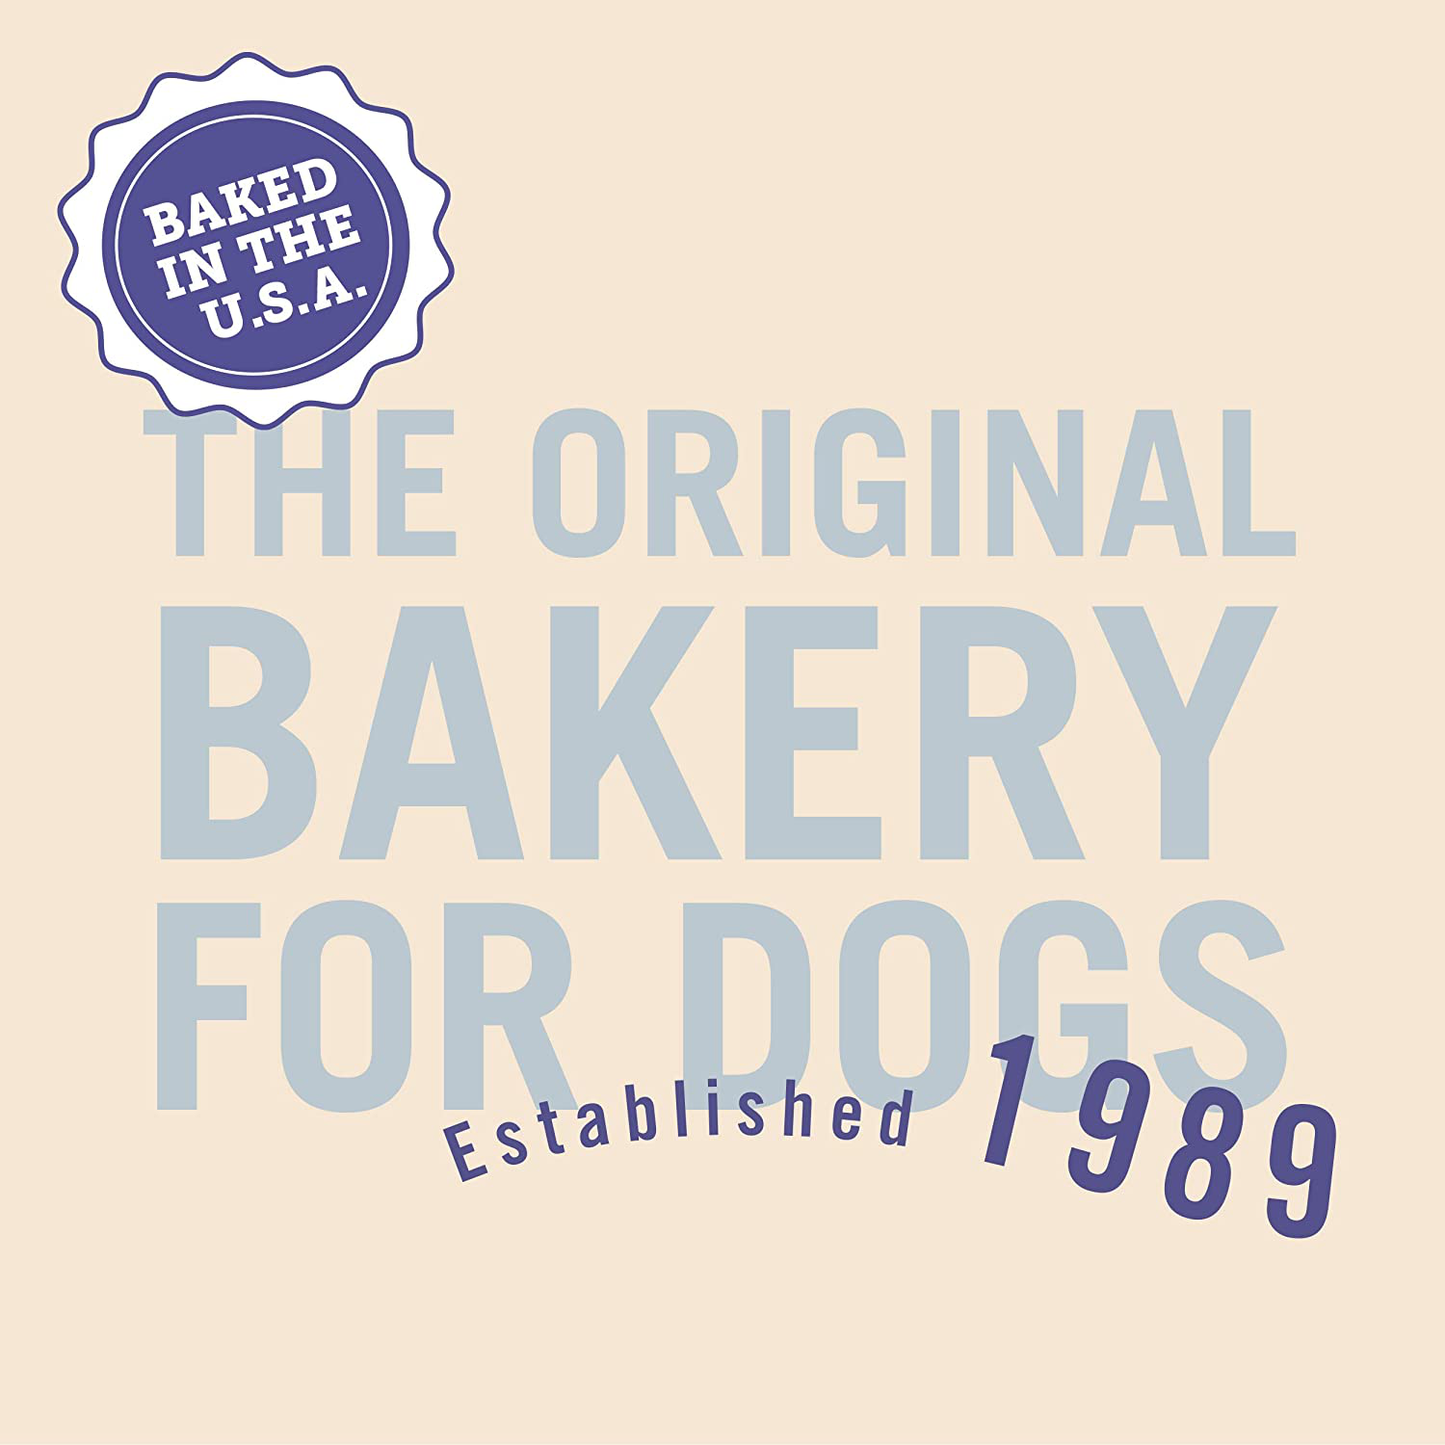 Three Dog Bakery Assort Mutt Trio, Soft Baked Cookies for Dogs